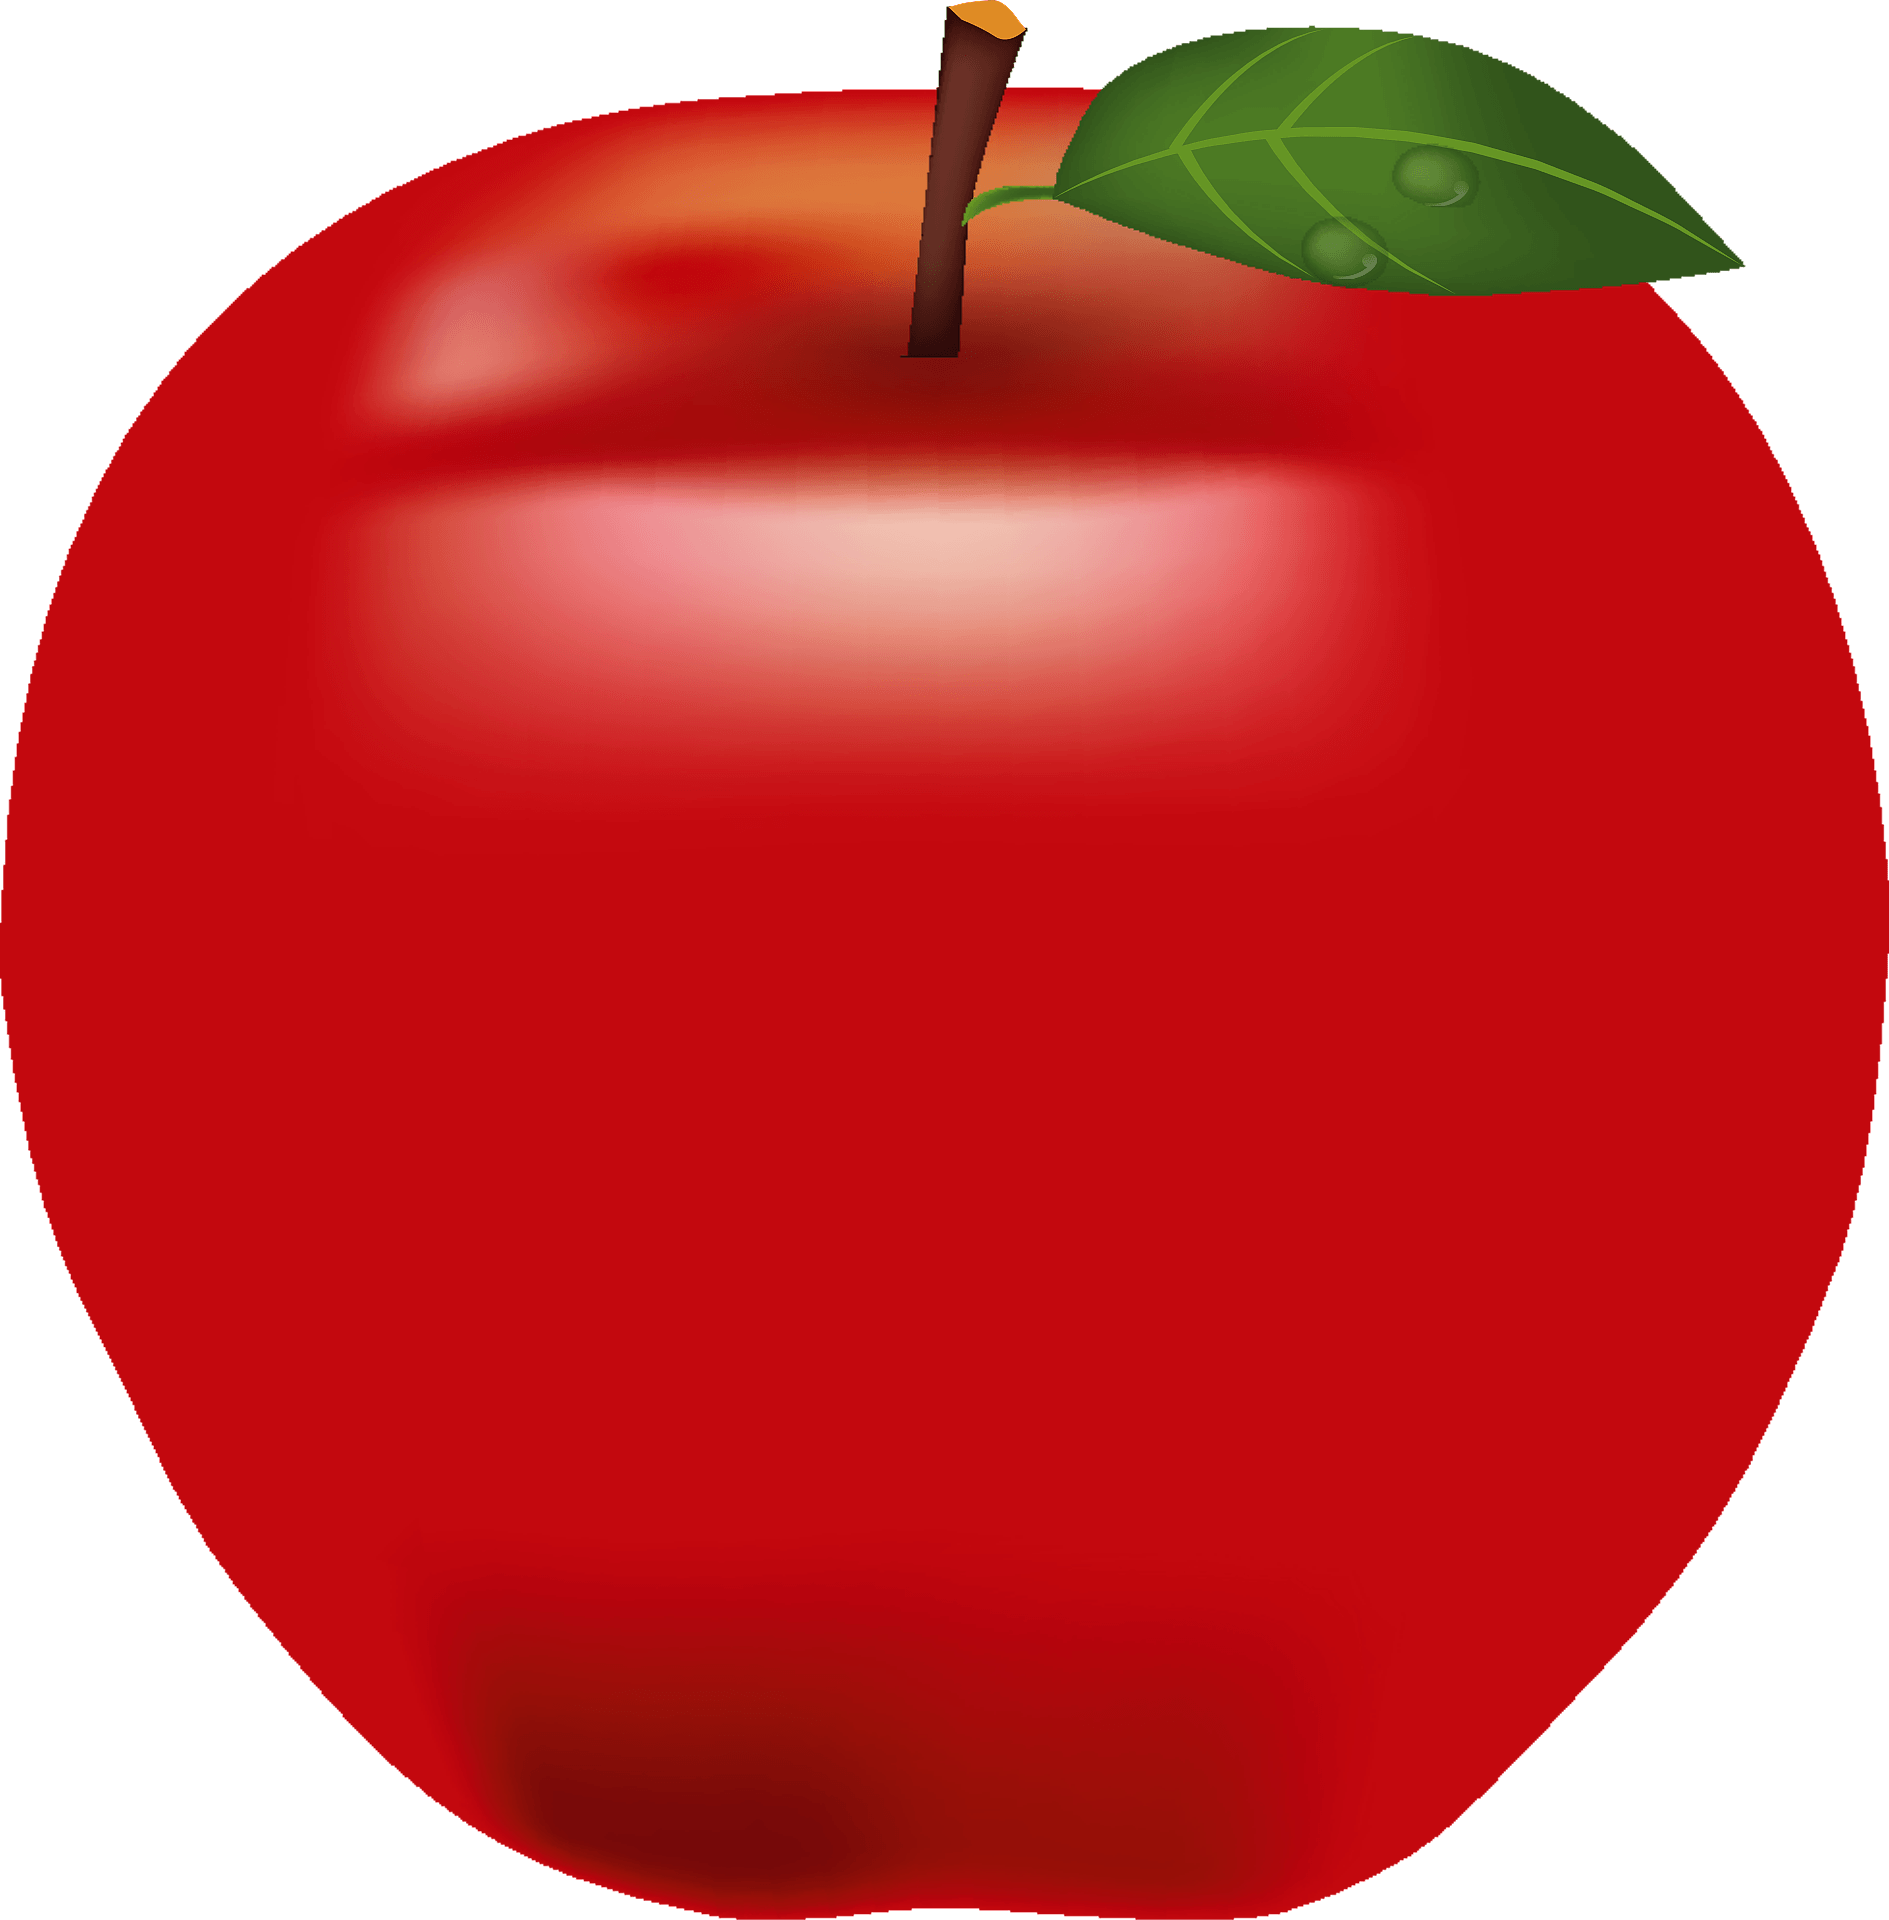 red-apple-with-a-green-leaf-free-svg-clip-art-library